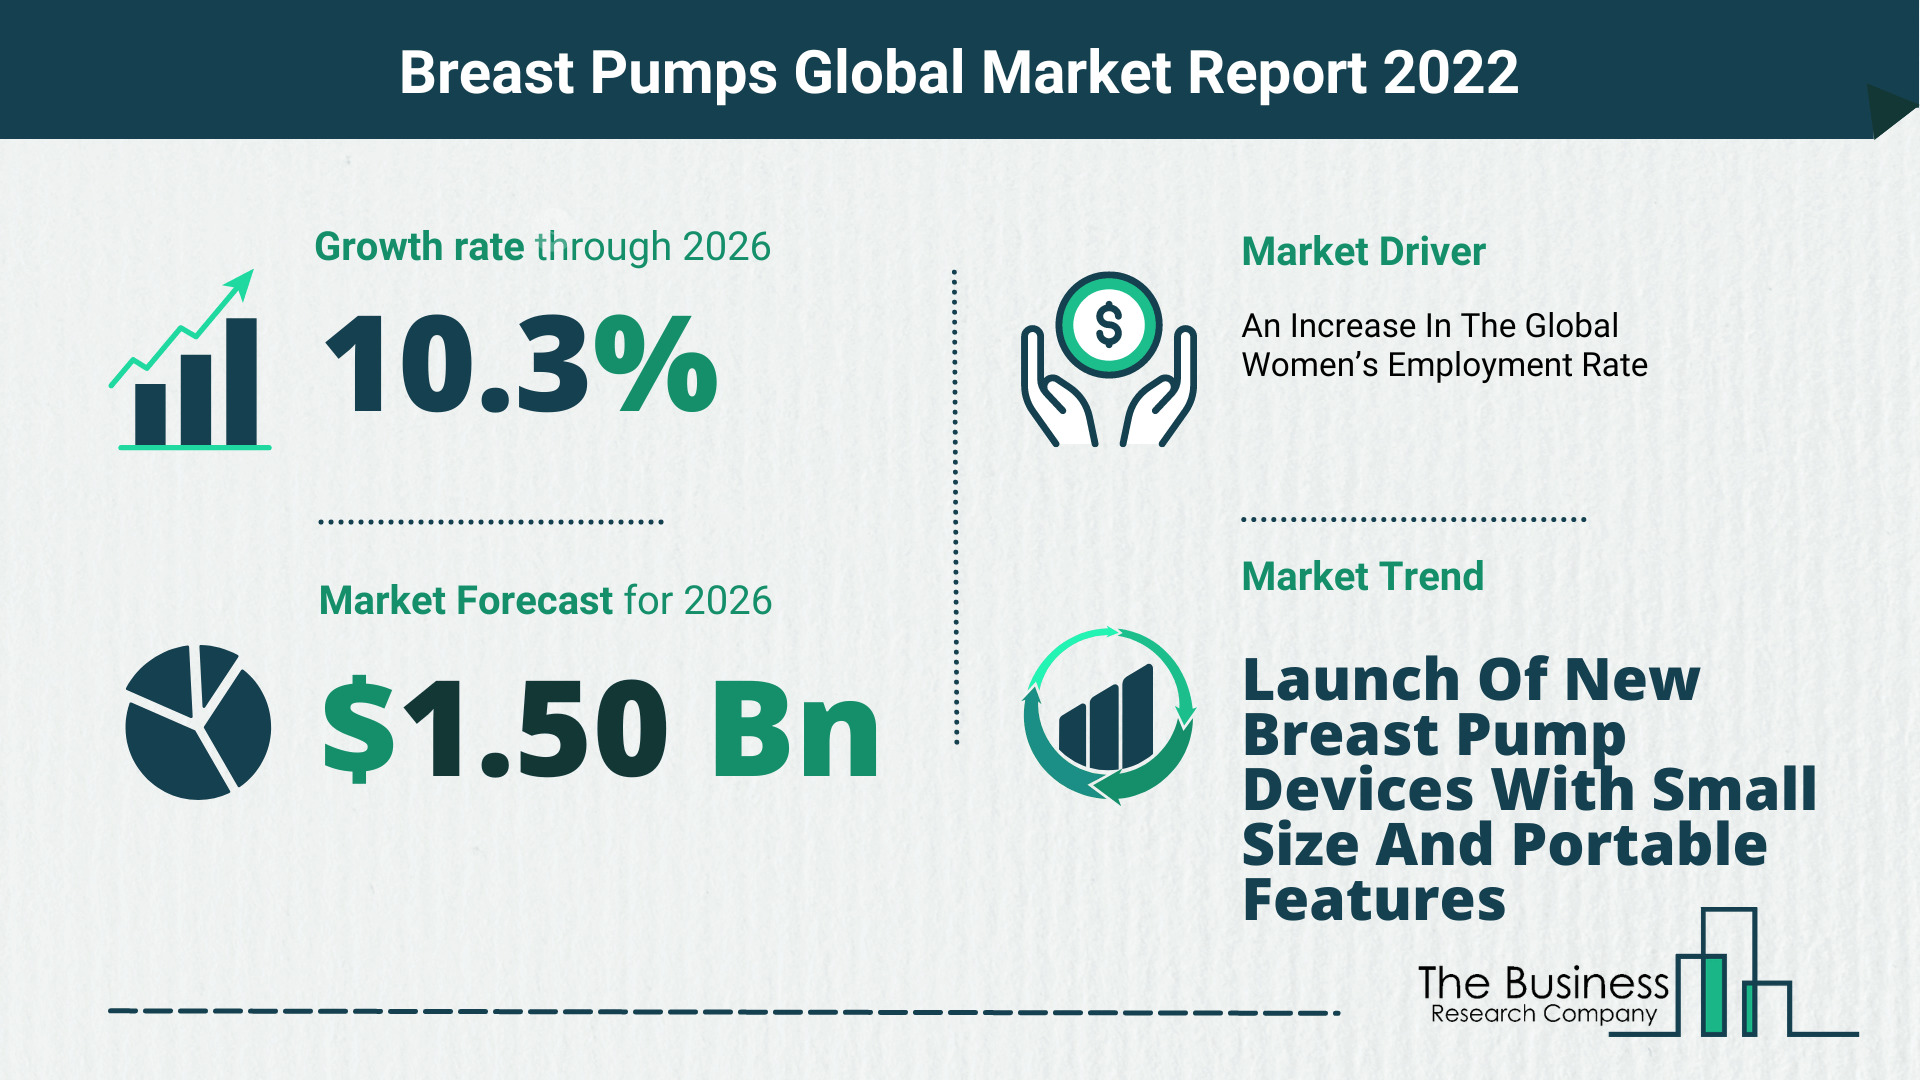 What Is The Breast Pumps Market Overview In 2022?